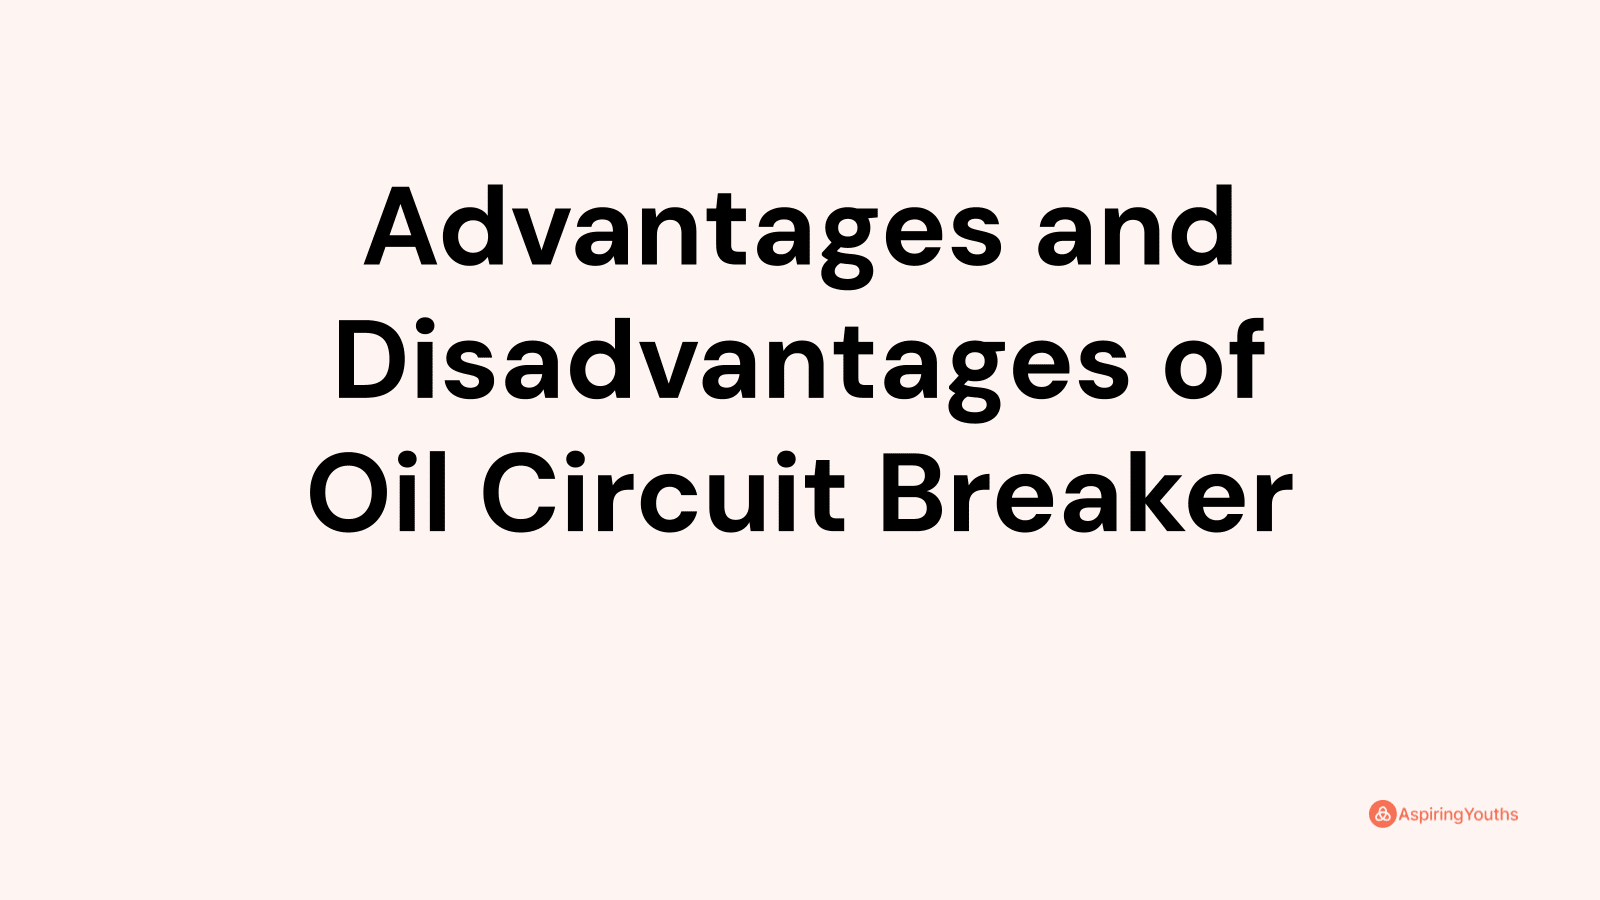 Advantages and disadvantages of Oil Circuit Breaker